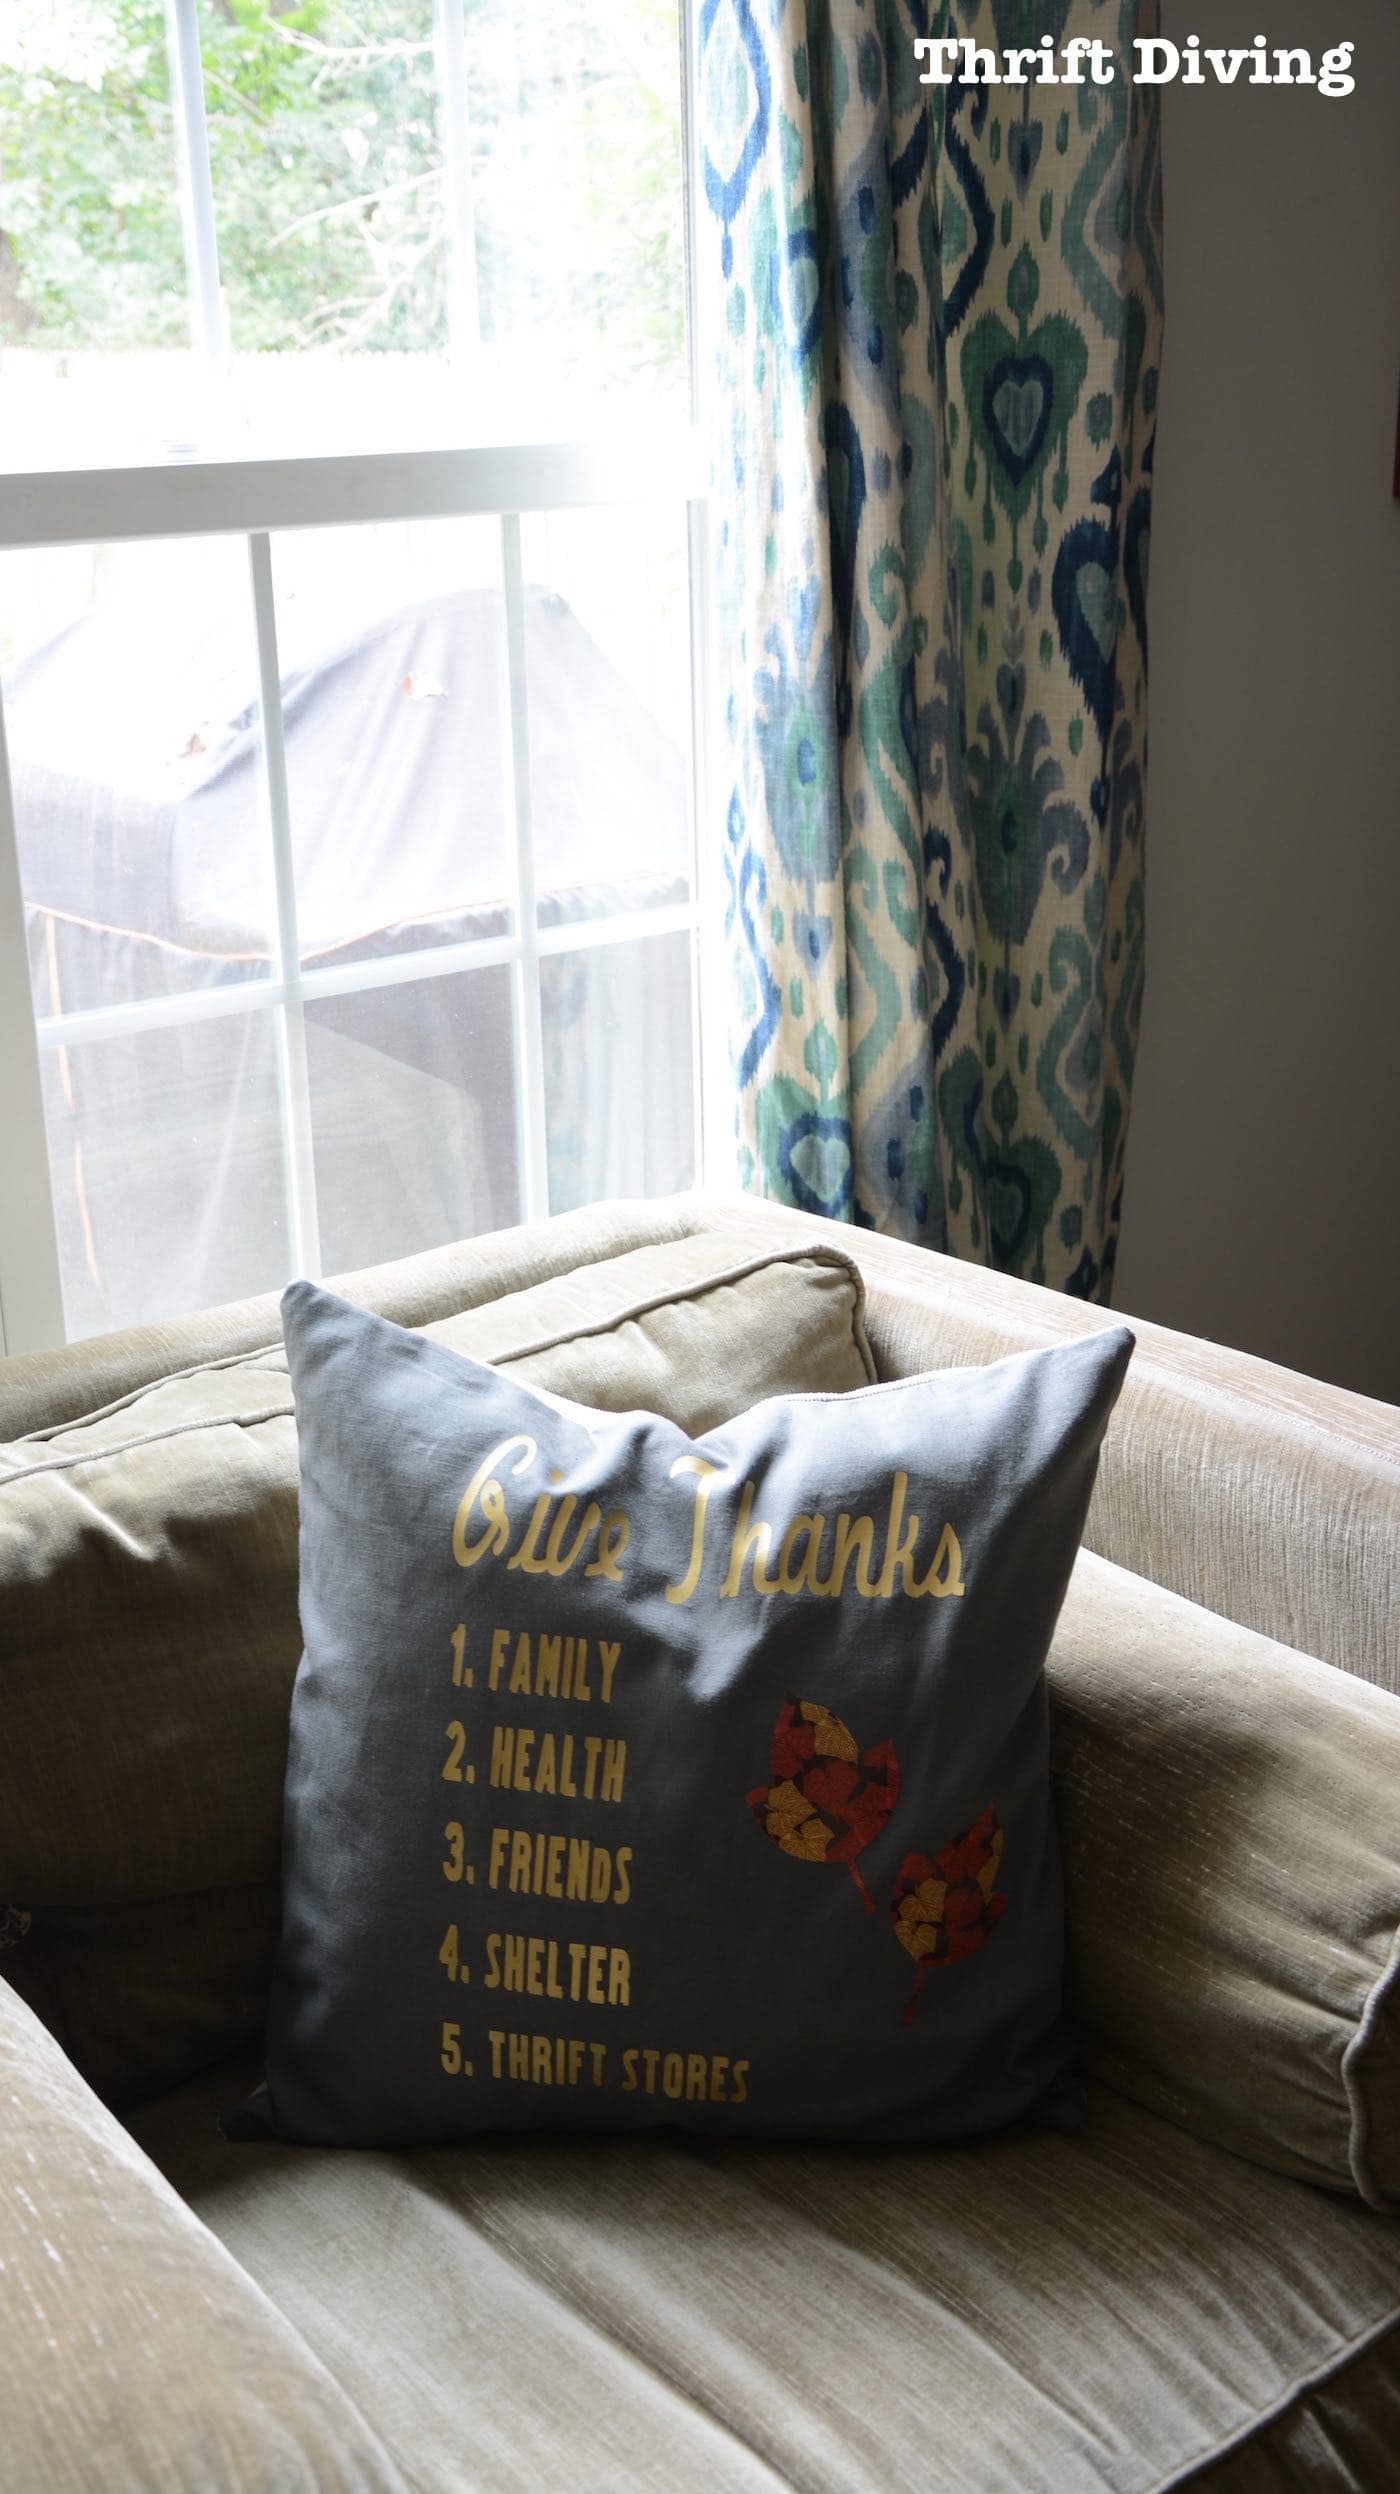 How to sew an iron-on DIY pillow for Thanksgiving - Quick and easy DIY pillows - Thrift Diving